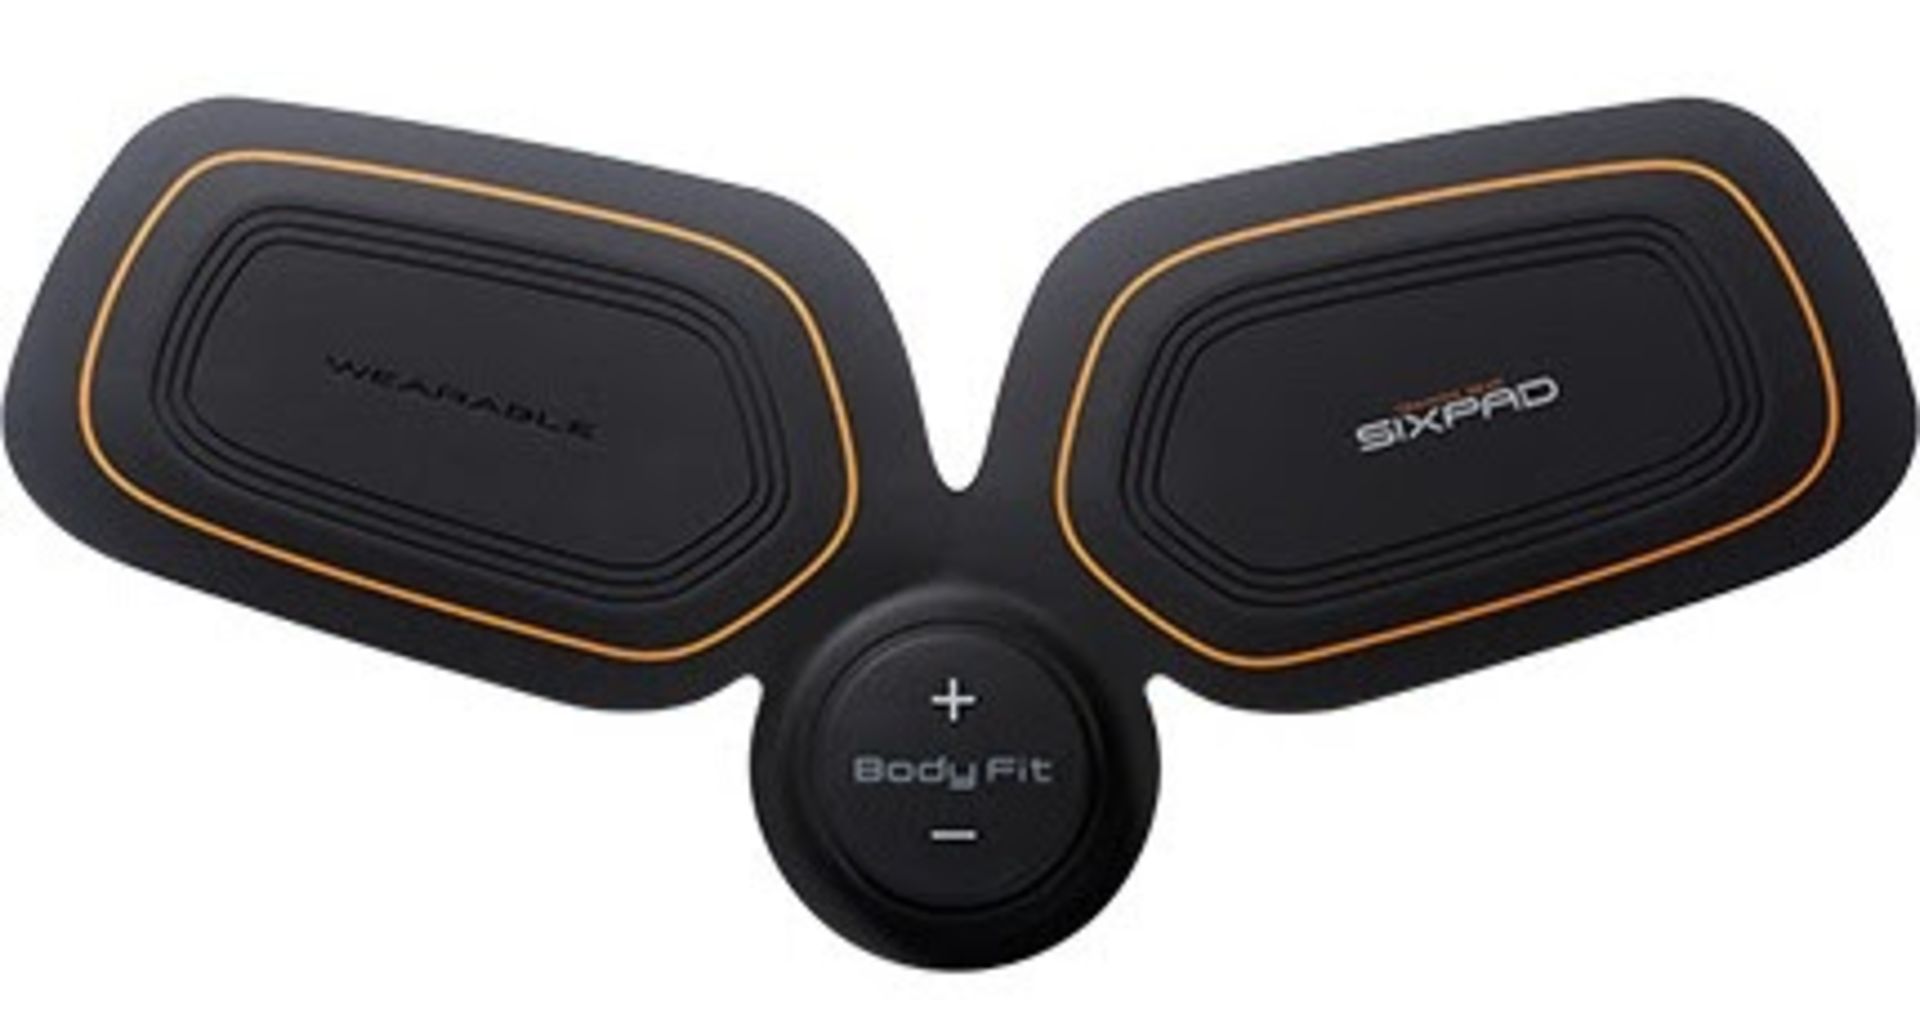 2 X NEW BOXED SIXPAD Bodyfit Tone multiple muscle groups. RRP £175 EACH.S1 Effective EMS (electrical